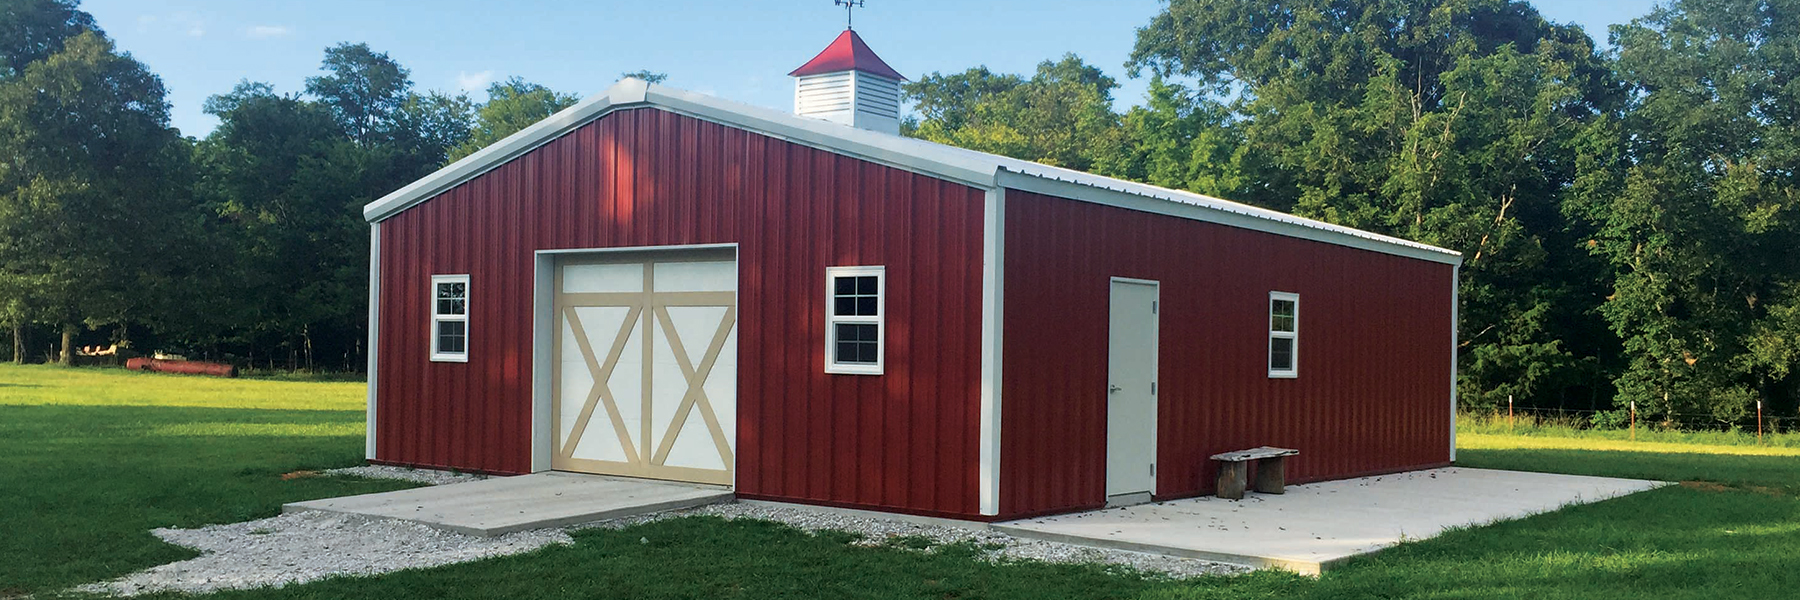 What size of shed can you build without permission? – MessHall